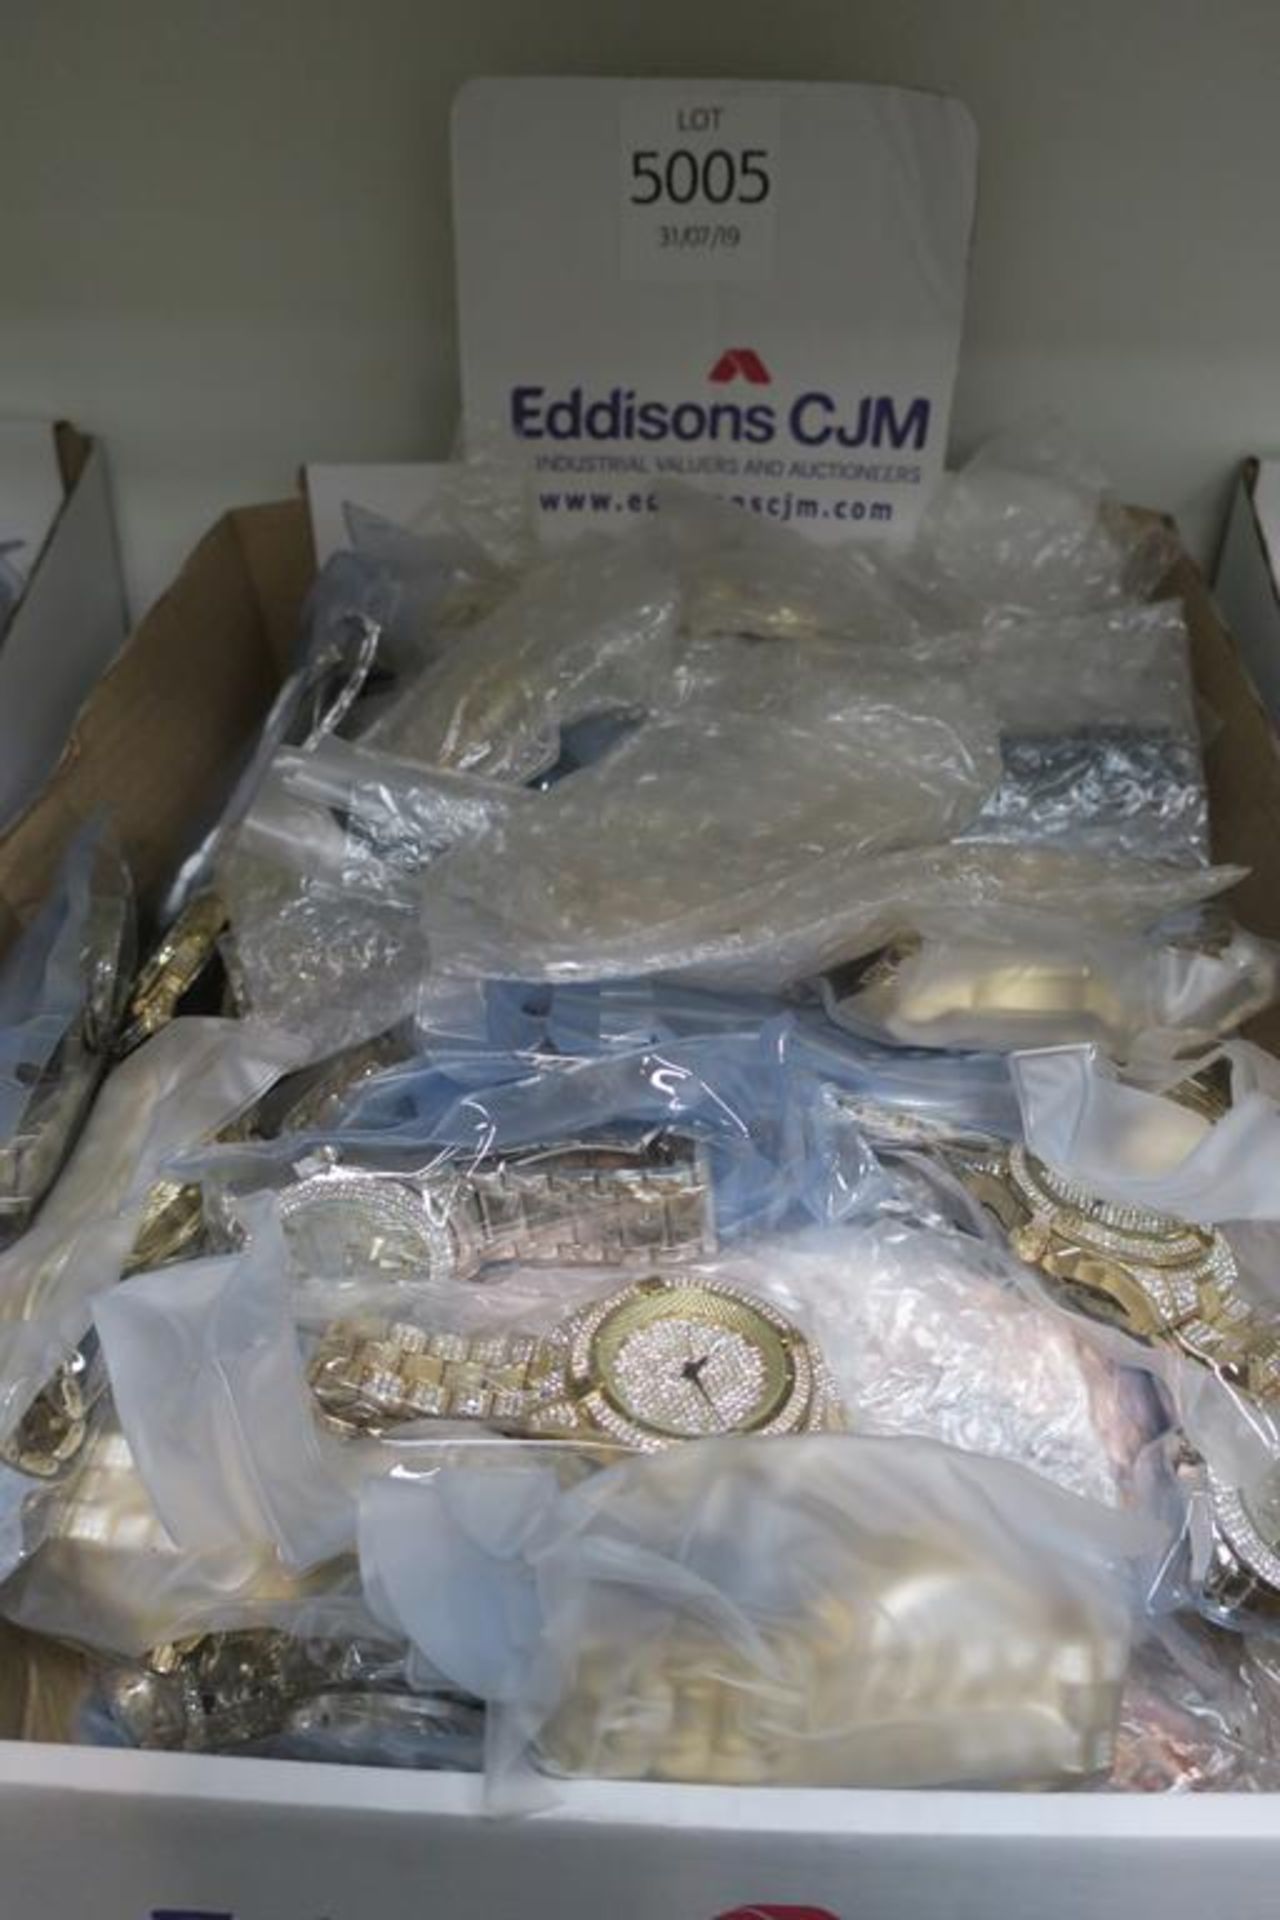 A Box containing over Ninety Wristwatches of assorted colours, sizes and styles